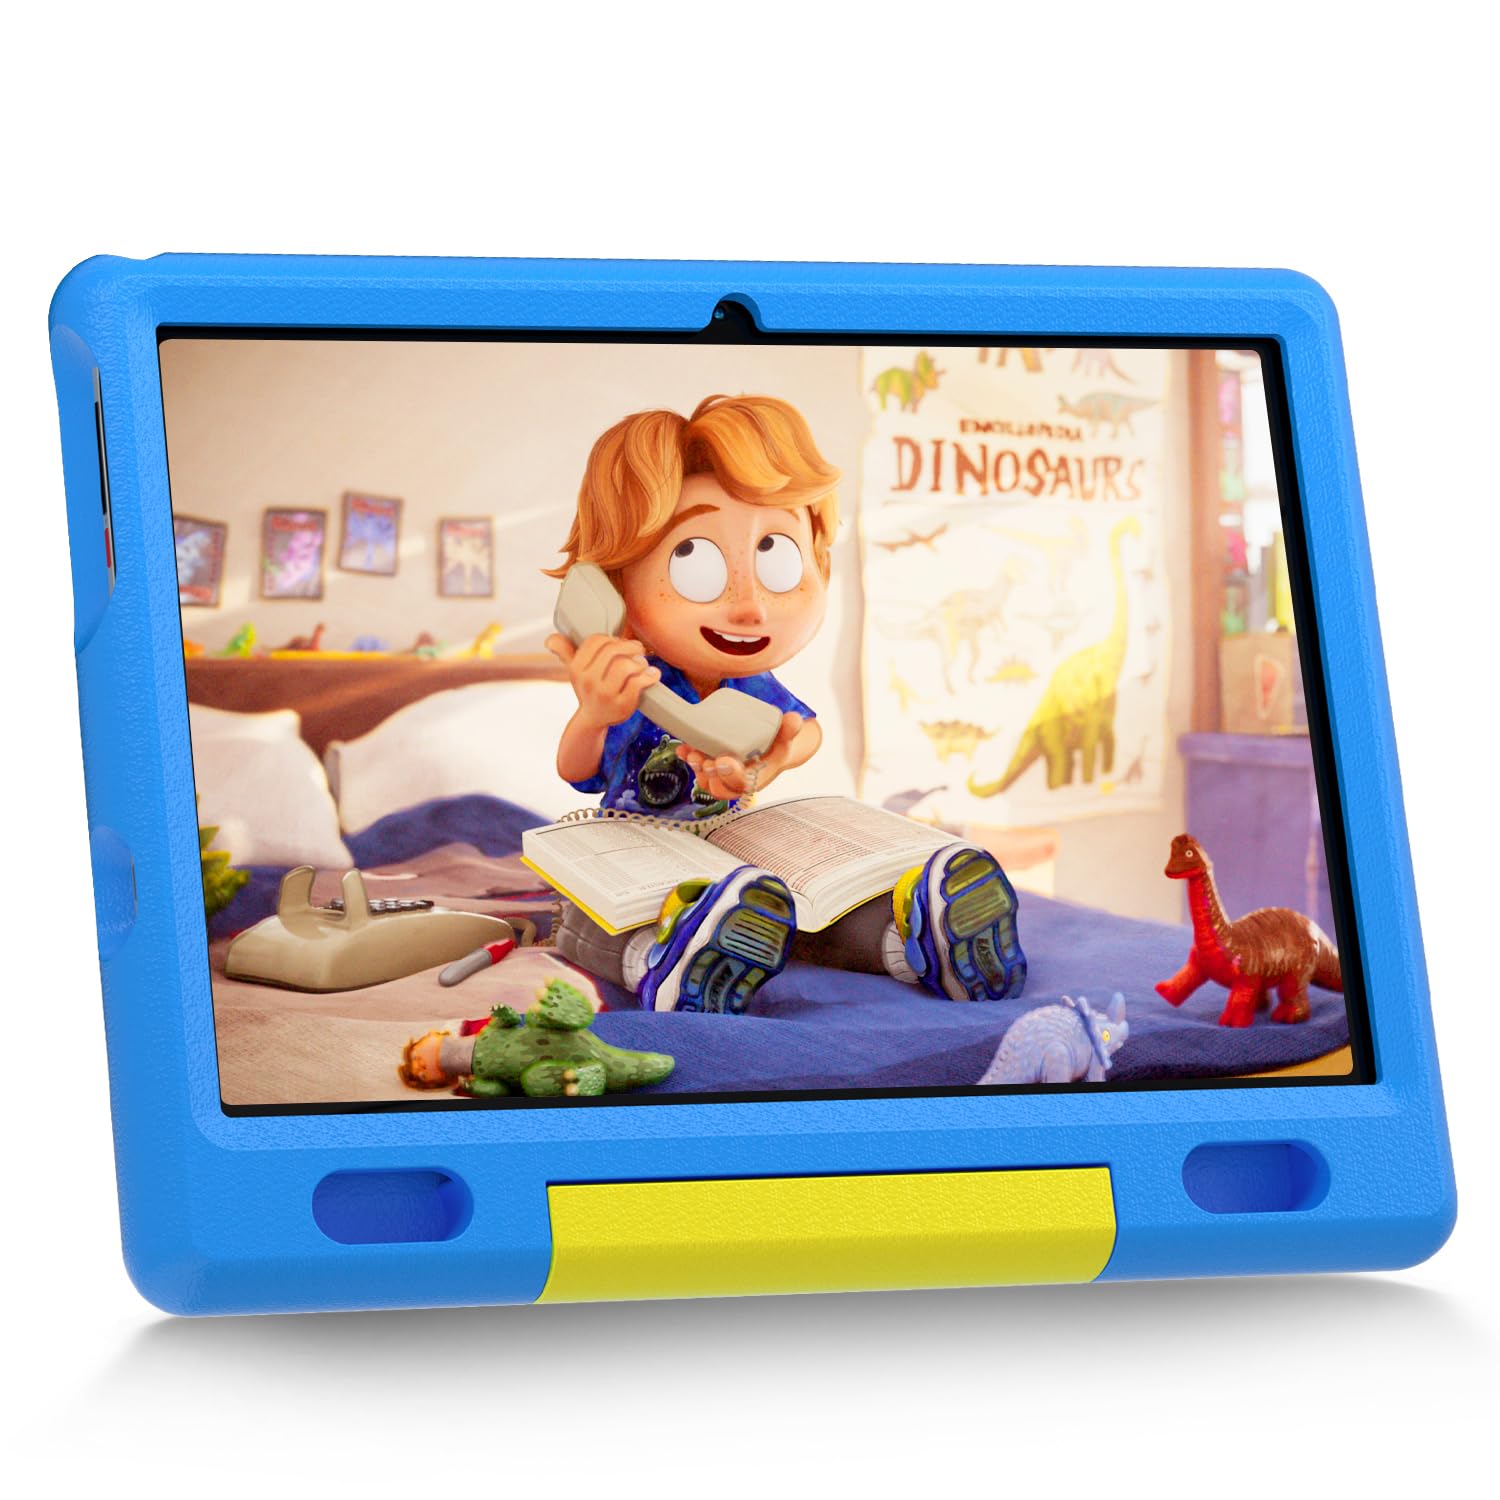 Lville Kids Tablet, 10 inch Android 12 Tablet, Tablet for Kids, Quad Core Processor, 2GB+32GB, 5000mAh, Kidoz Pre Installed, Parental Control, WiFi, Bluetooth, Kid-Proof Case (Blue)